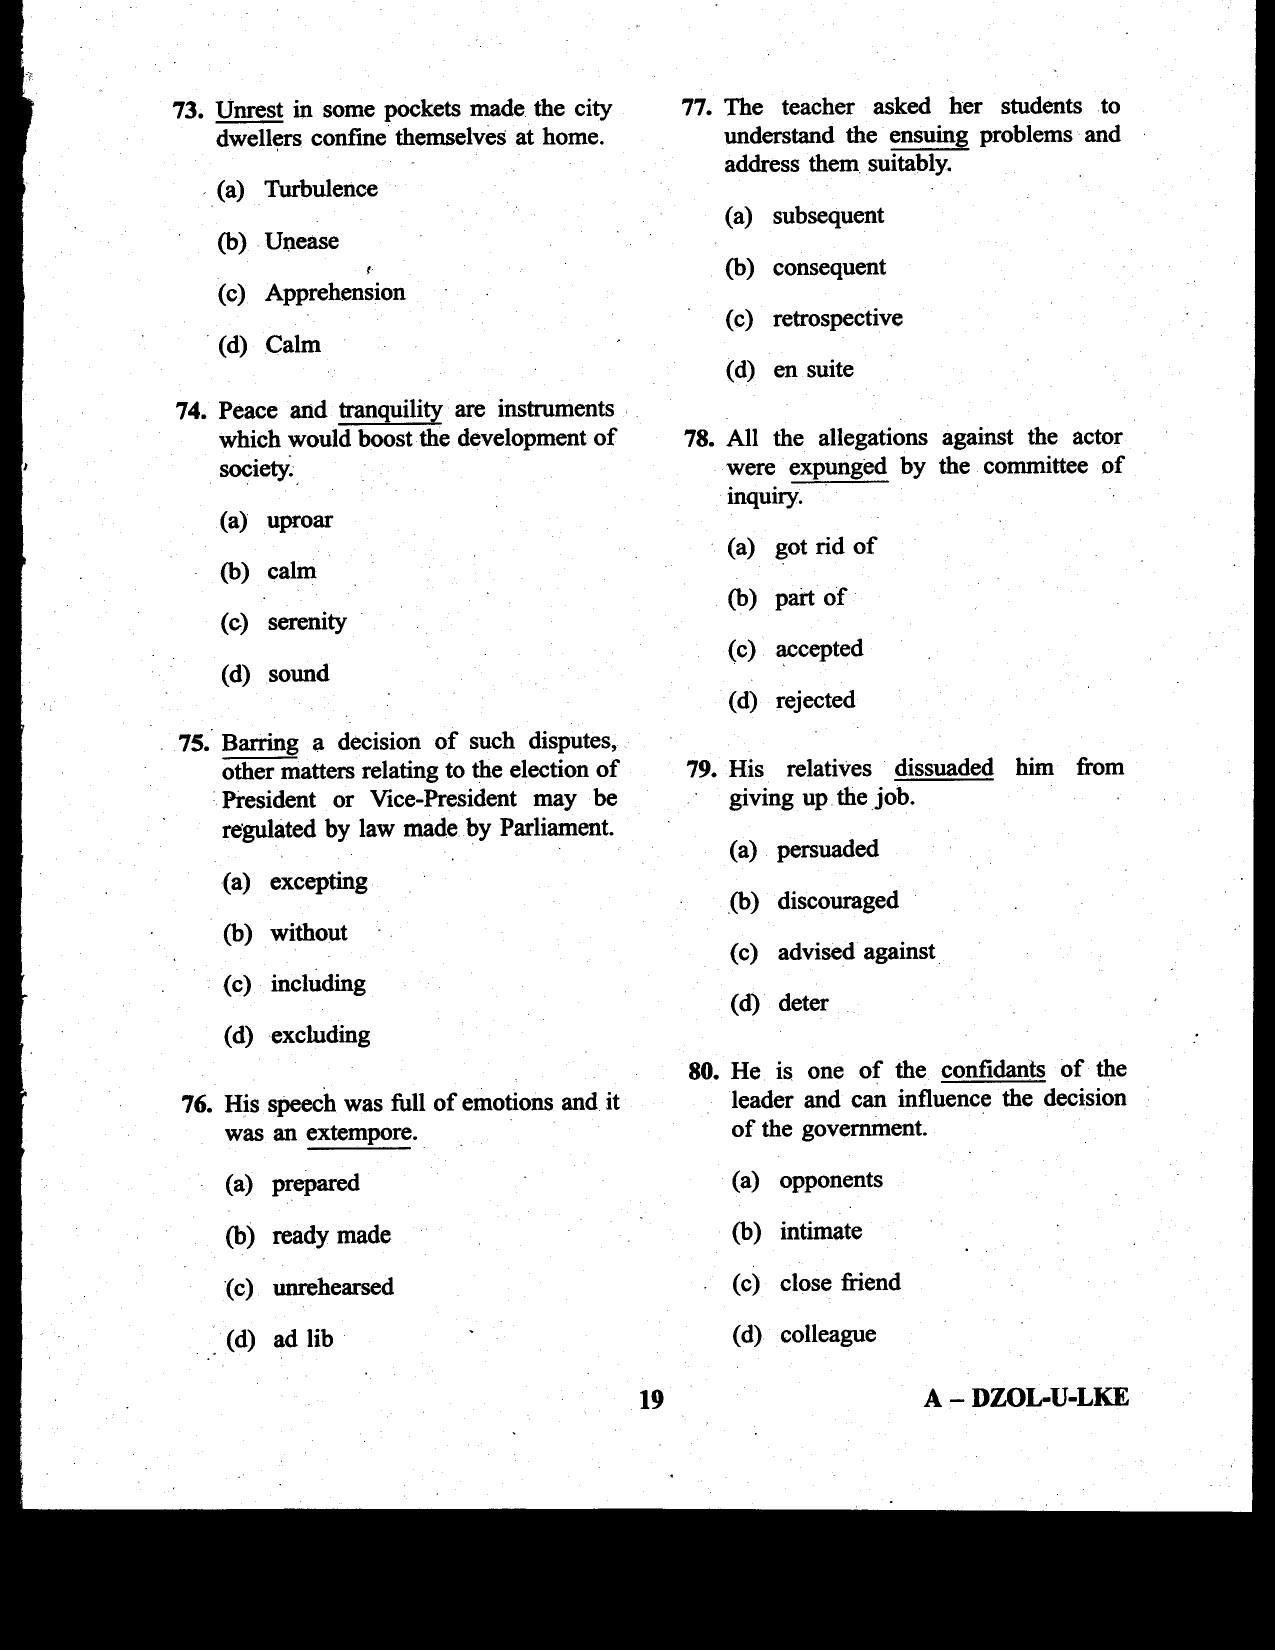 CDS II Examination 2020 English Question Paper - Image 19